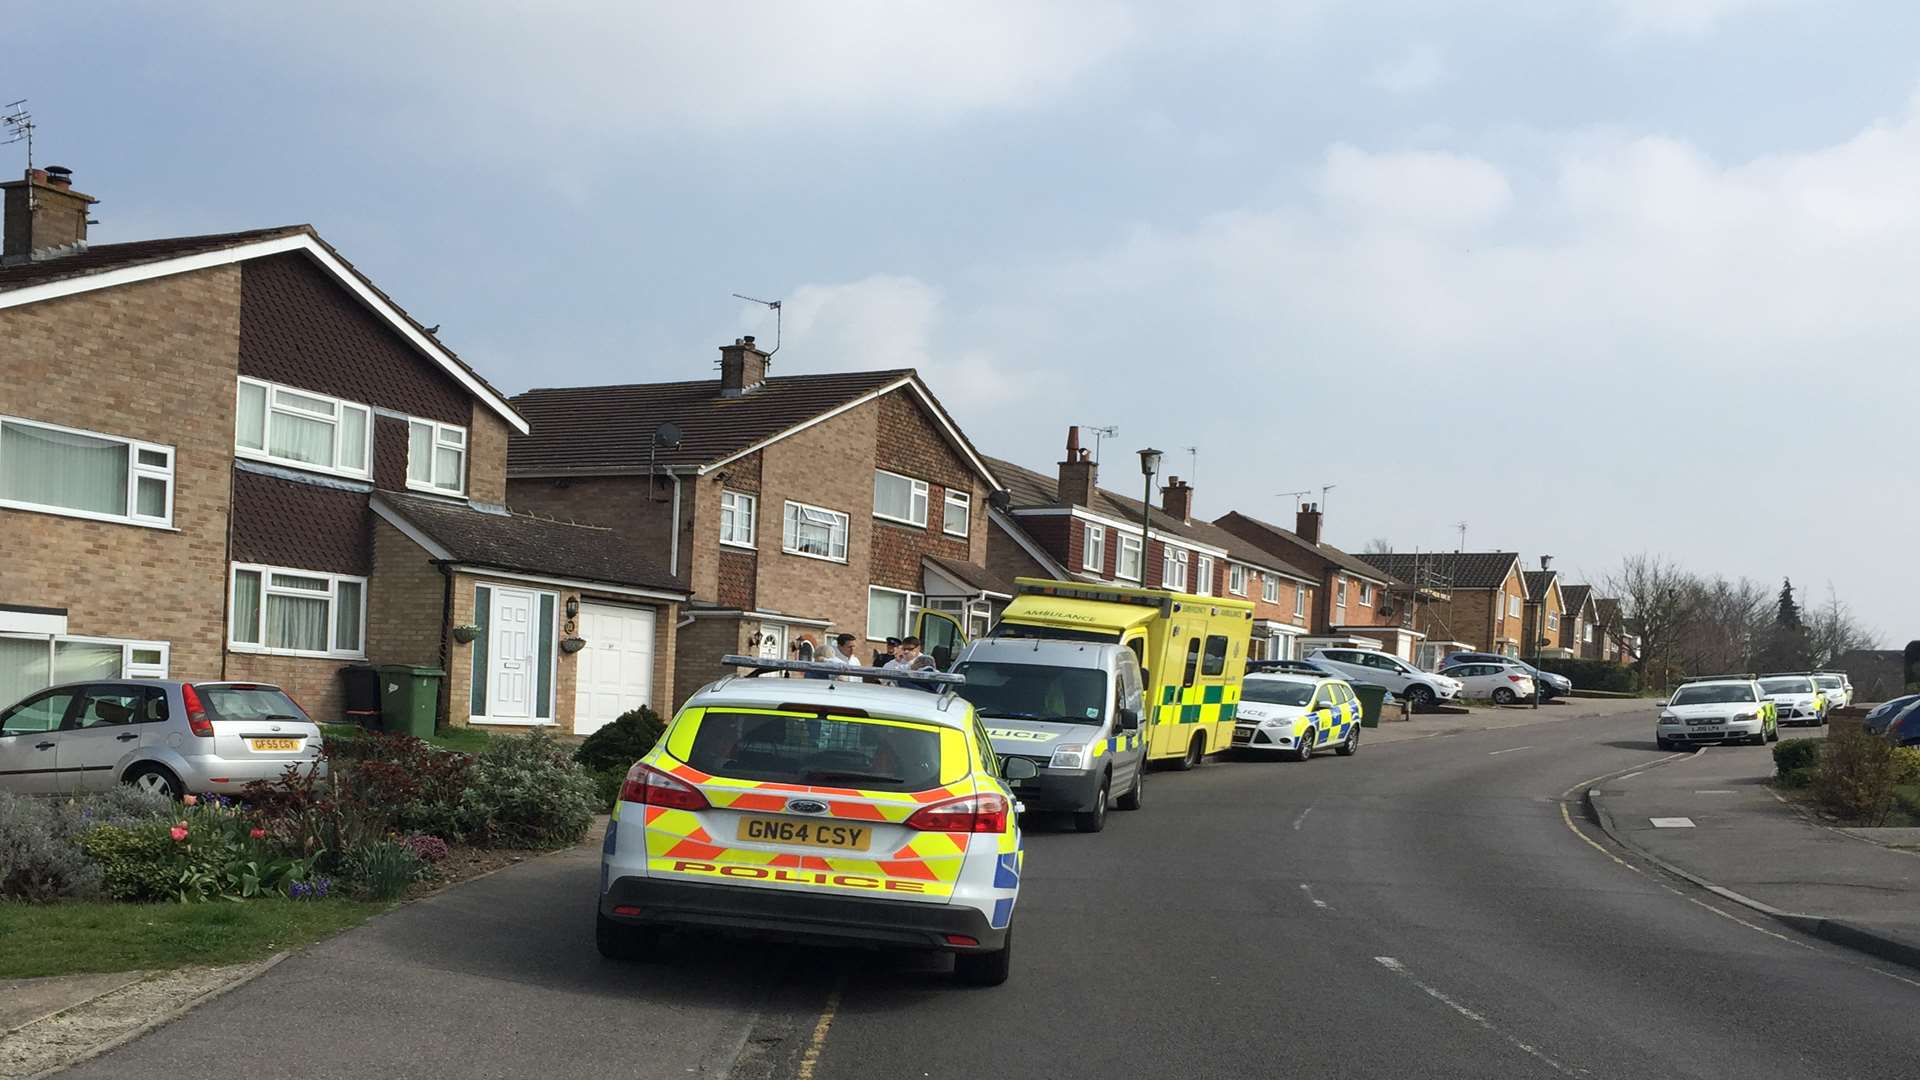 Police were called to Birling Avenue, Bearsted, at around 1.30pm.